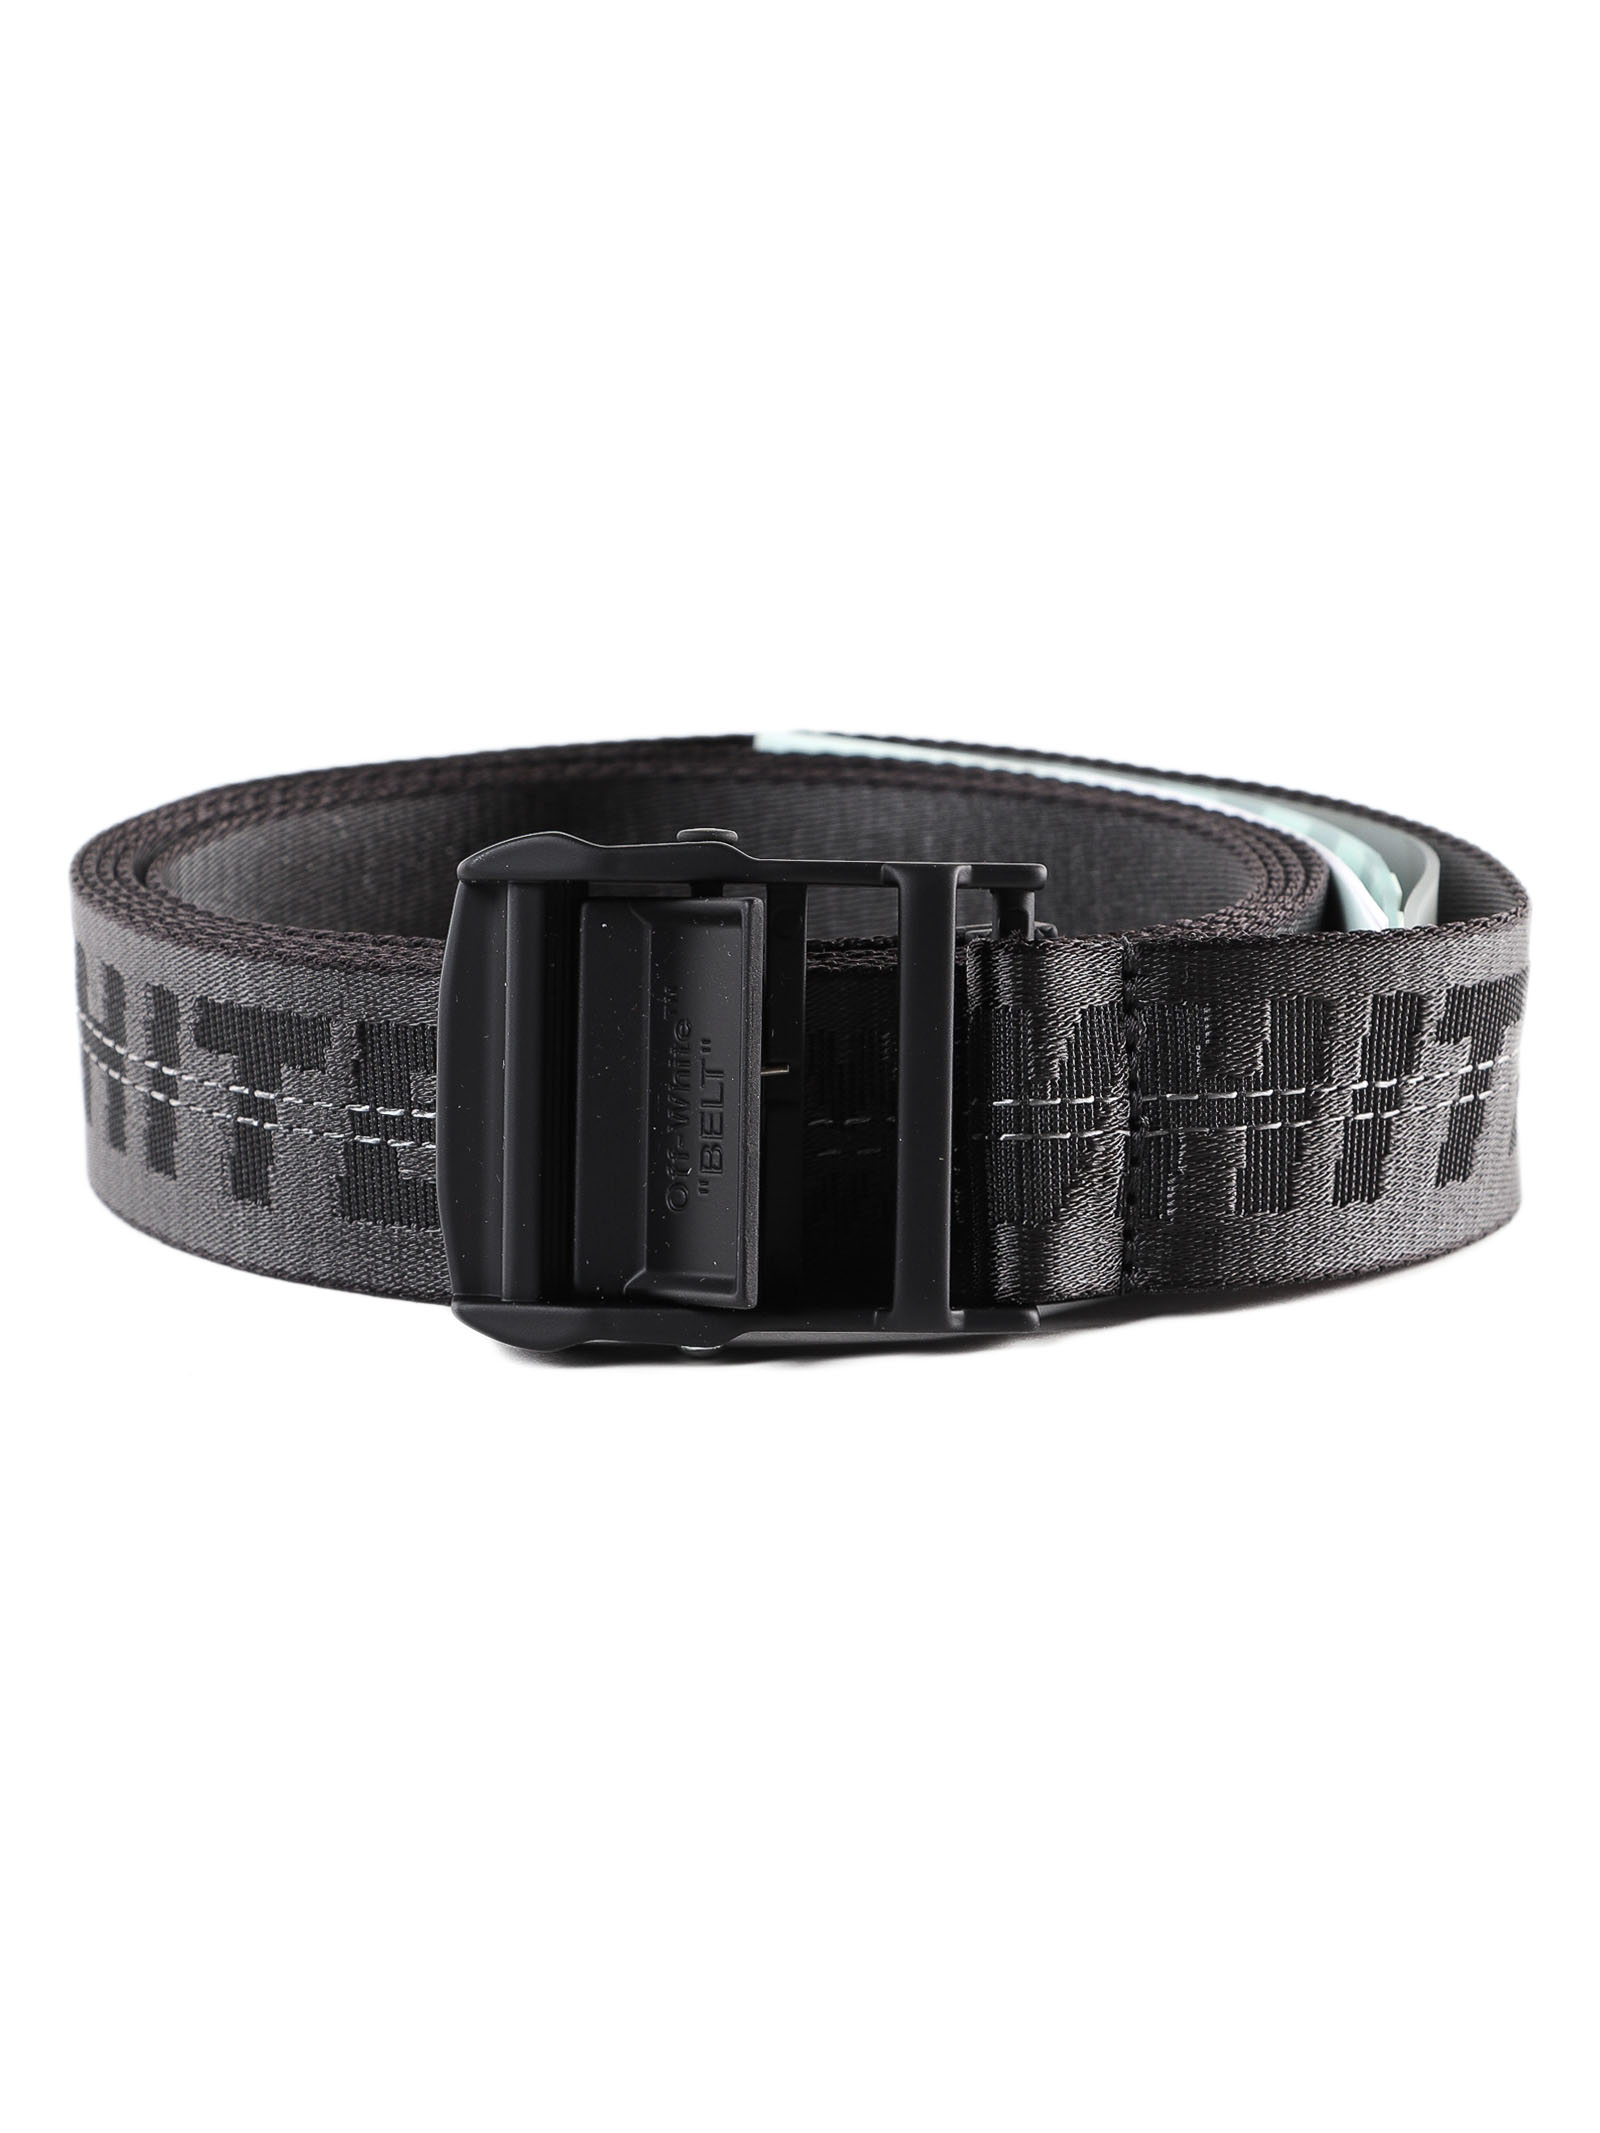 OFF-WHITE x YELLOW INDUSTRIAL BELT